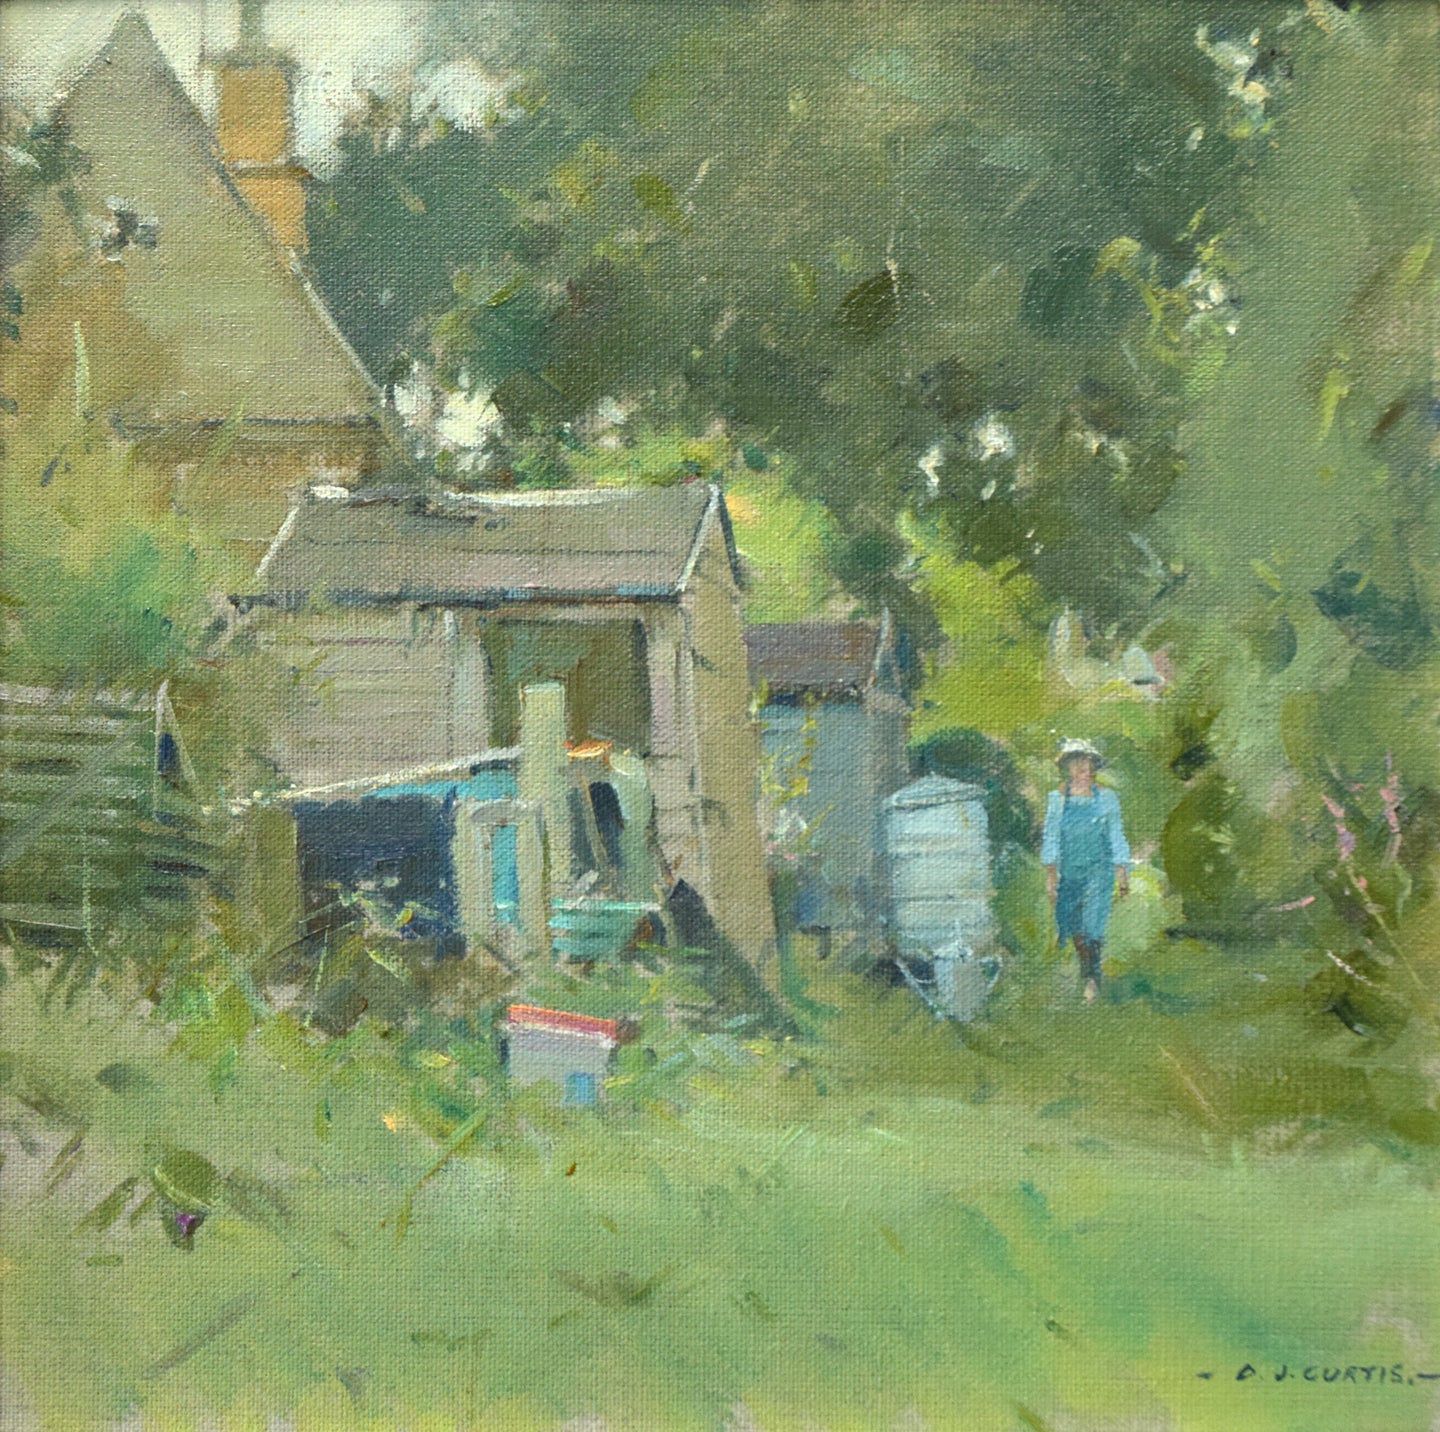 12 x 12 inch oil painting, with various leaning sheds at the back of an old workman's cottage, with a figure walking towards us on a grassy path between the sheds and some trees.